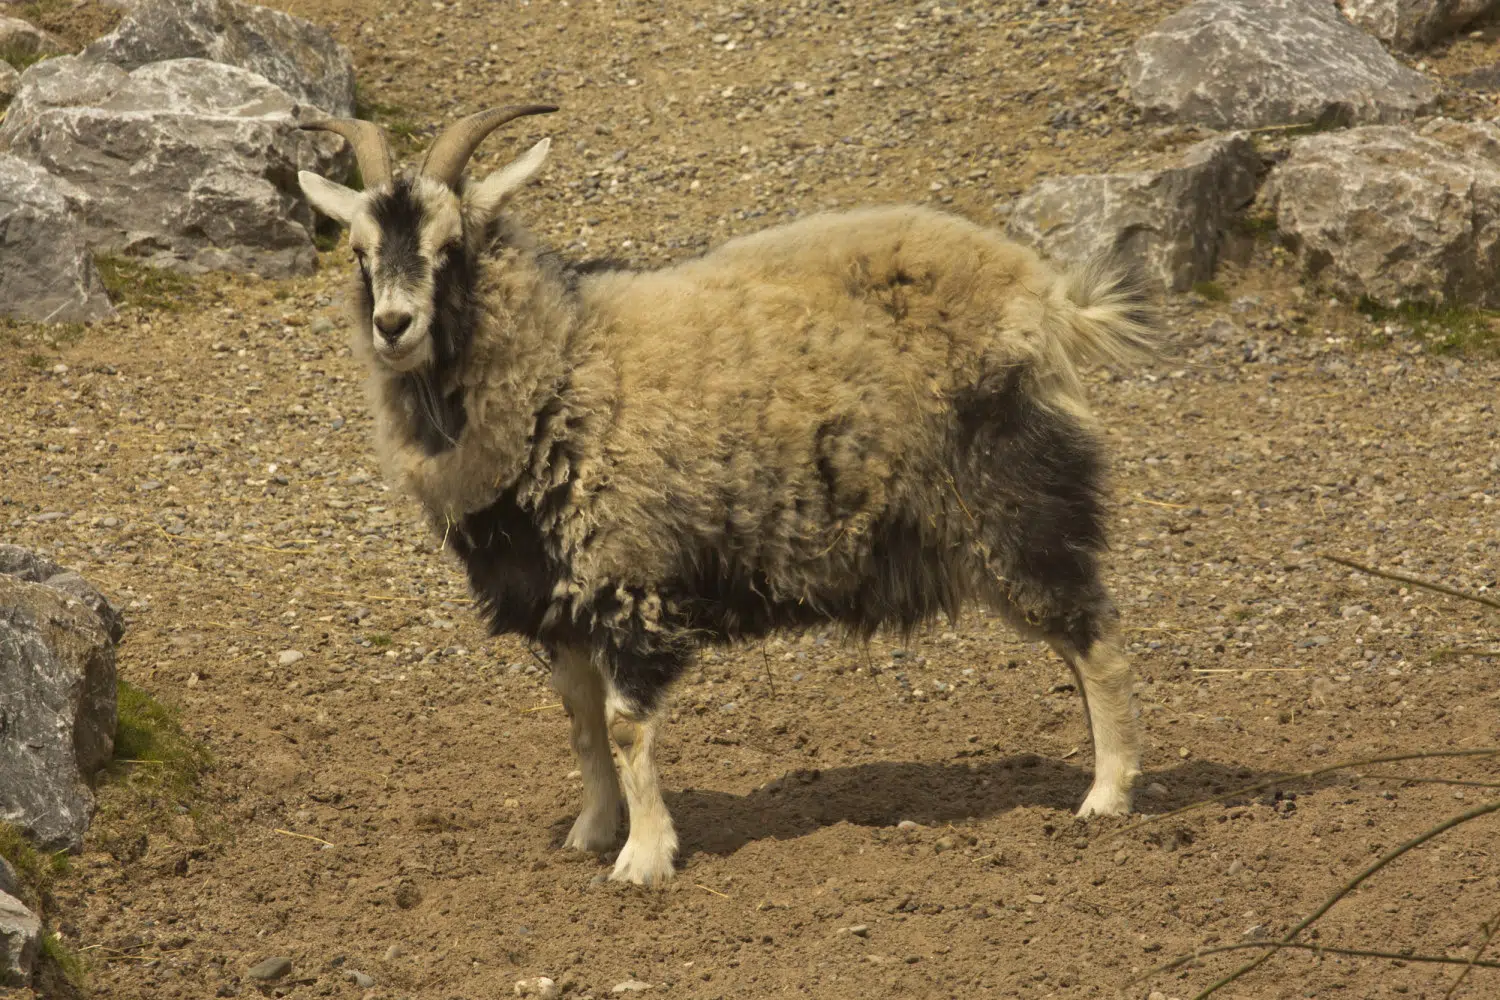 The cashmere goat